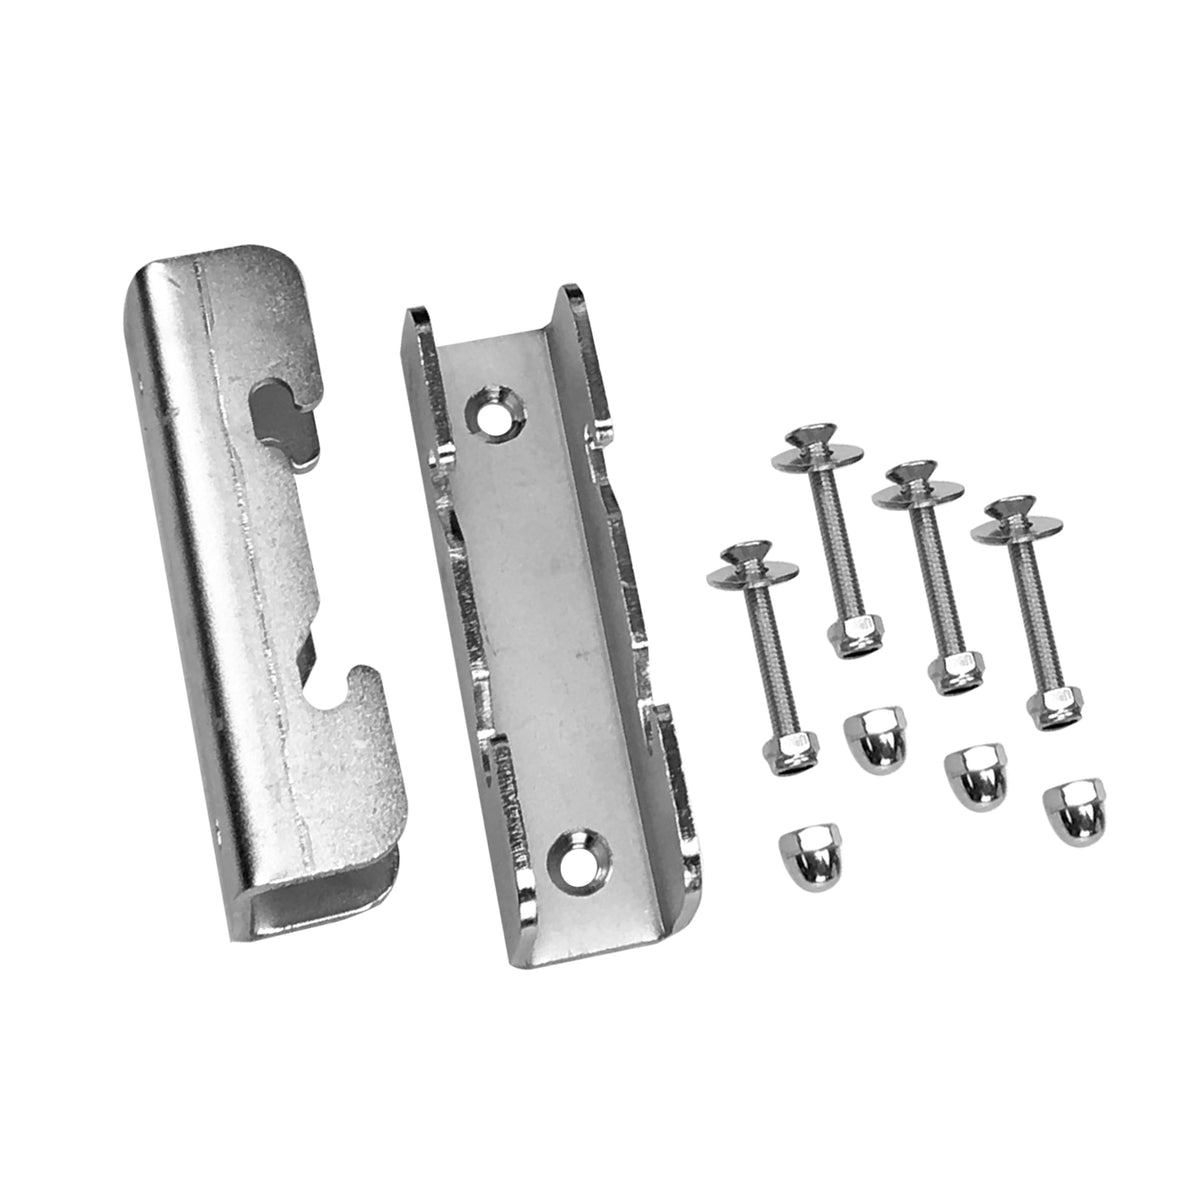 https://cdn.shopify.com/s/files/1/1172/0686/products/EXTRA-BRACKET-SET-FOR-SEAMAX-STAINLESS-STEEL-LAUNCHING-WHEELS_1200x.jpg?v=1648579601